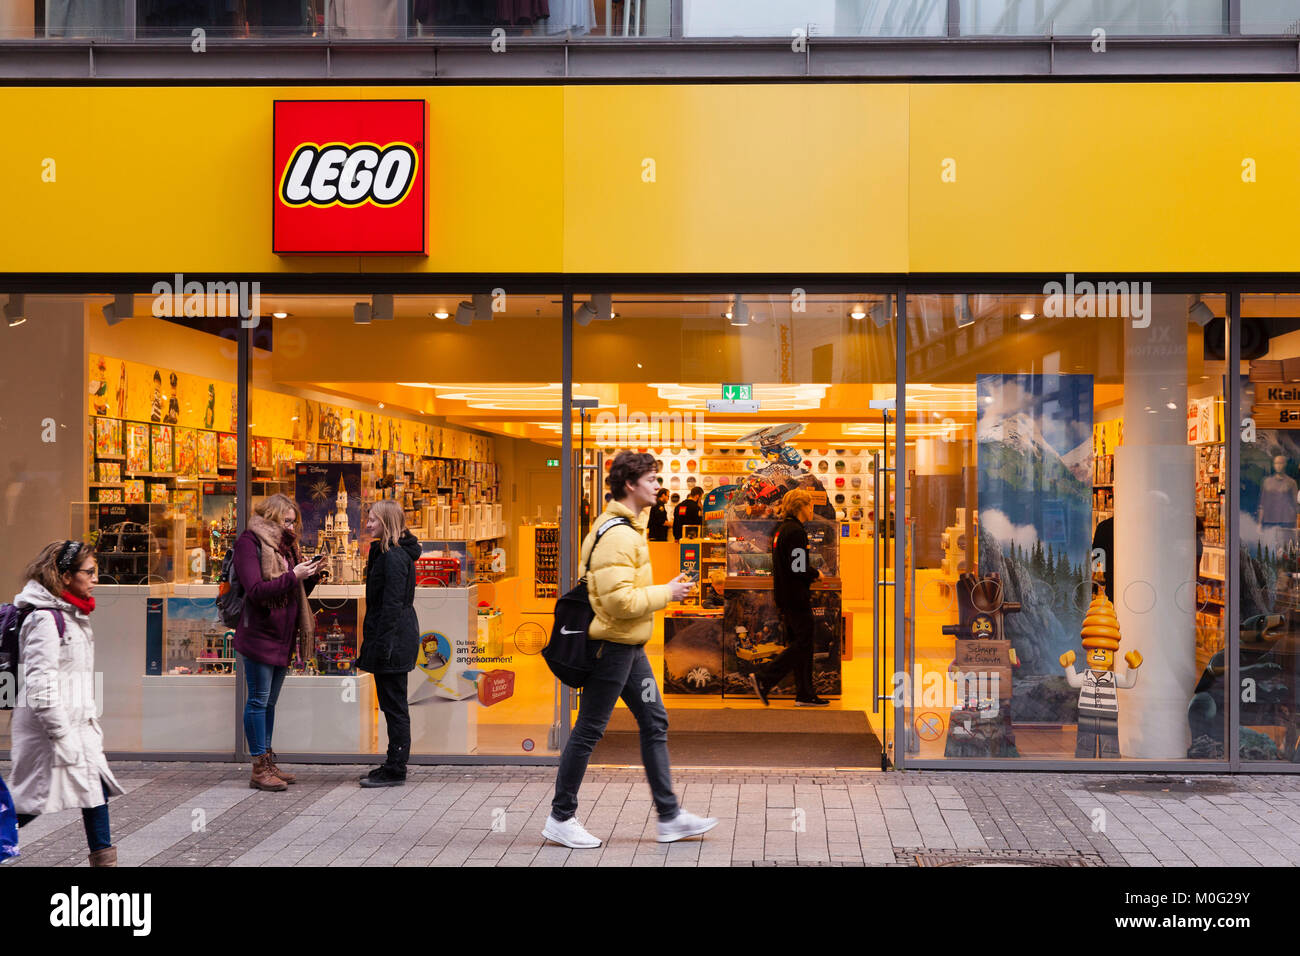 Toy Store High Resolution Stock Photography and Images - Alamy